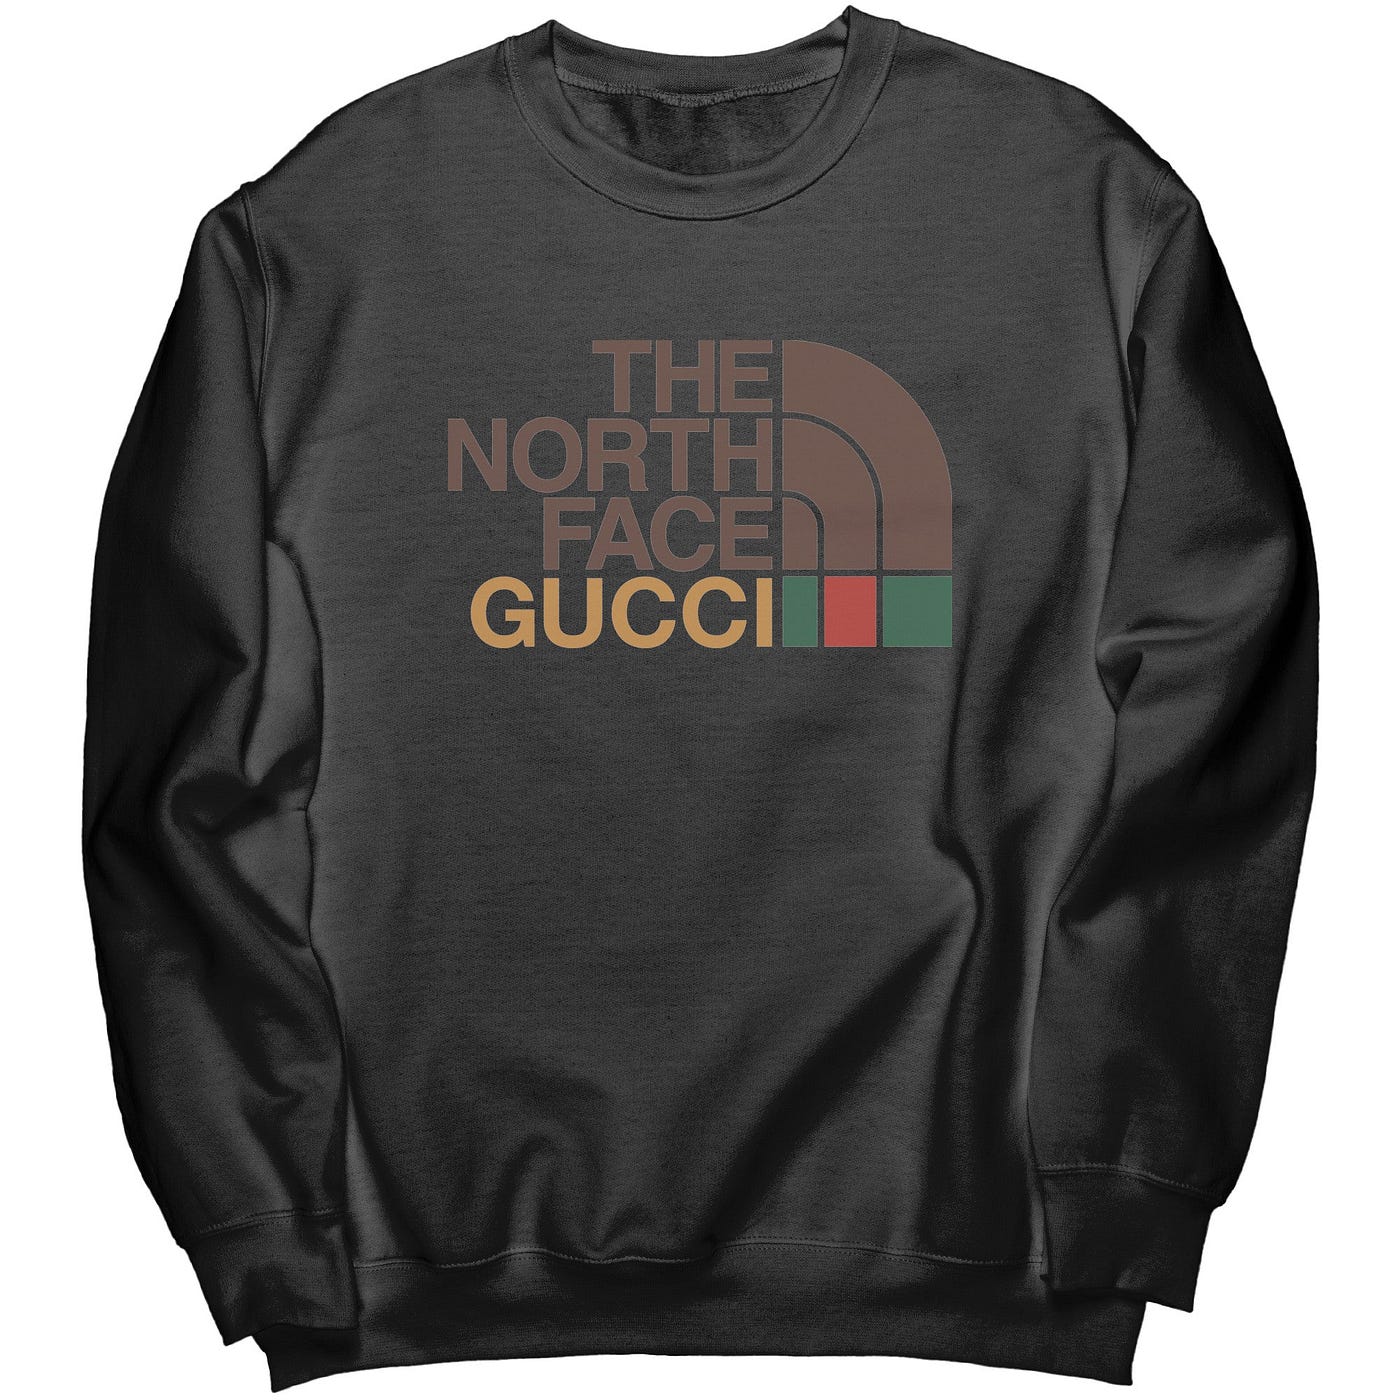 The North Face x Gucci Hoodie: A Fusion of Style and Functionality